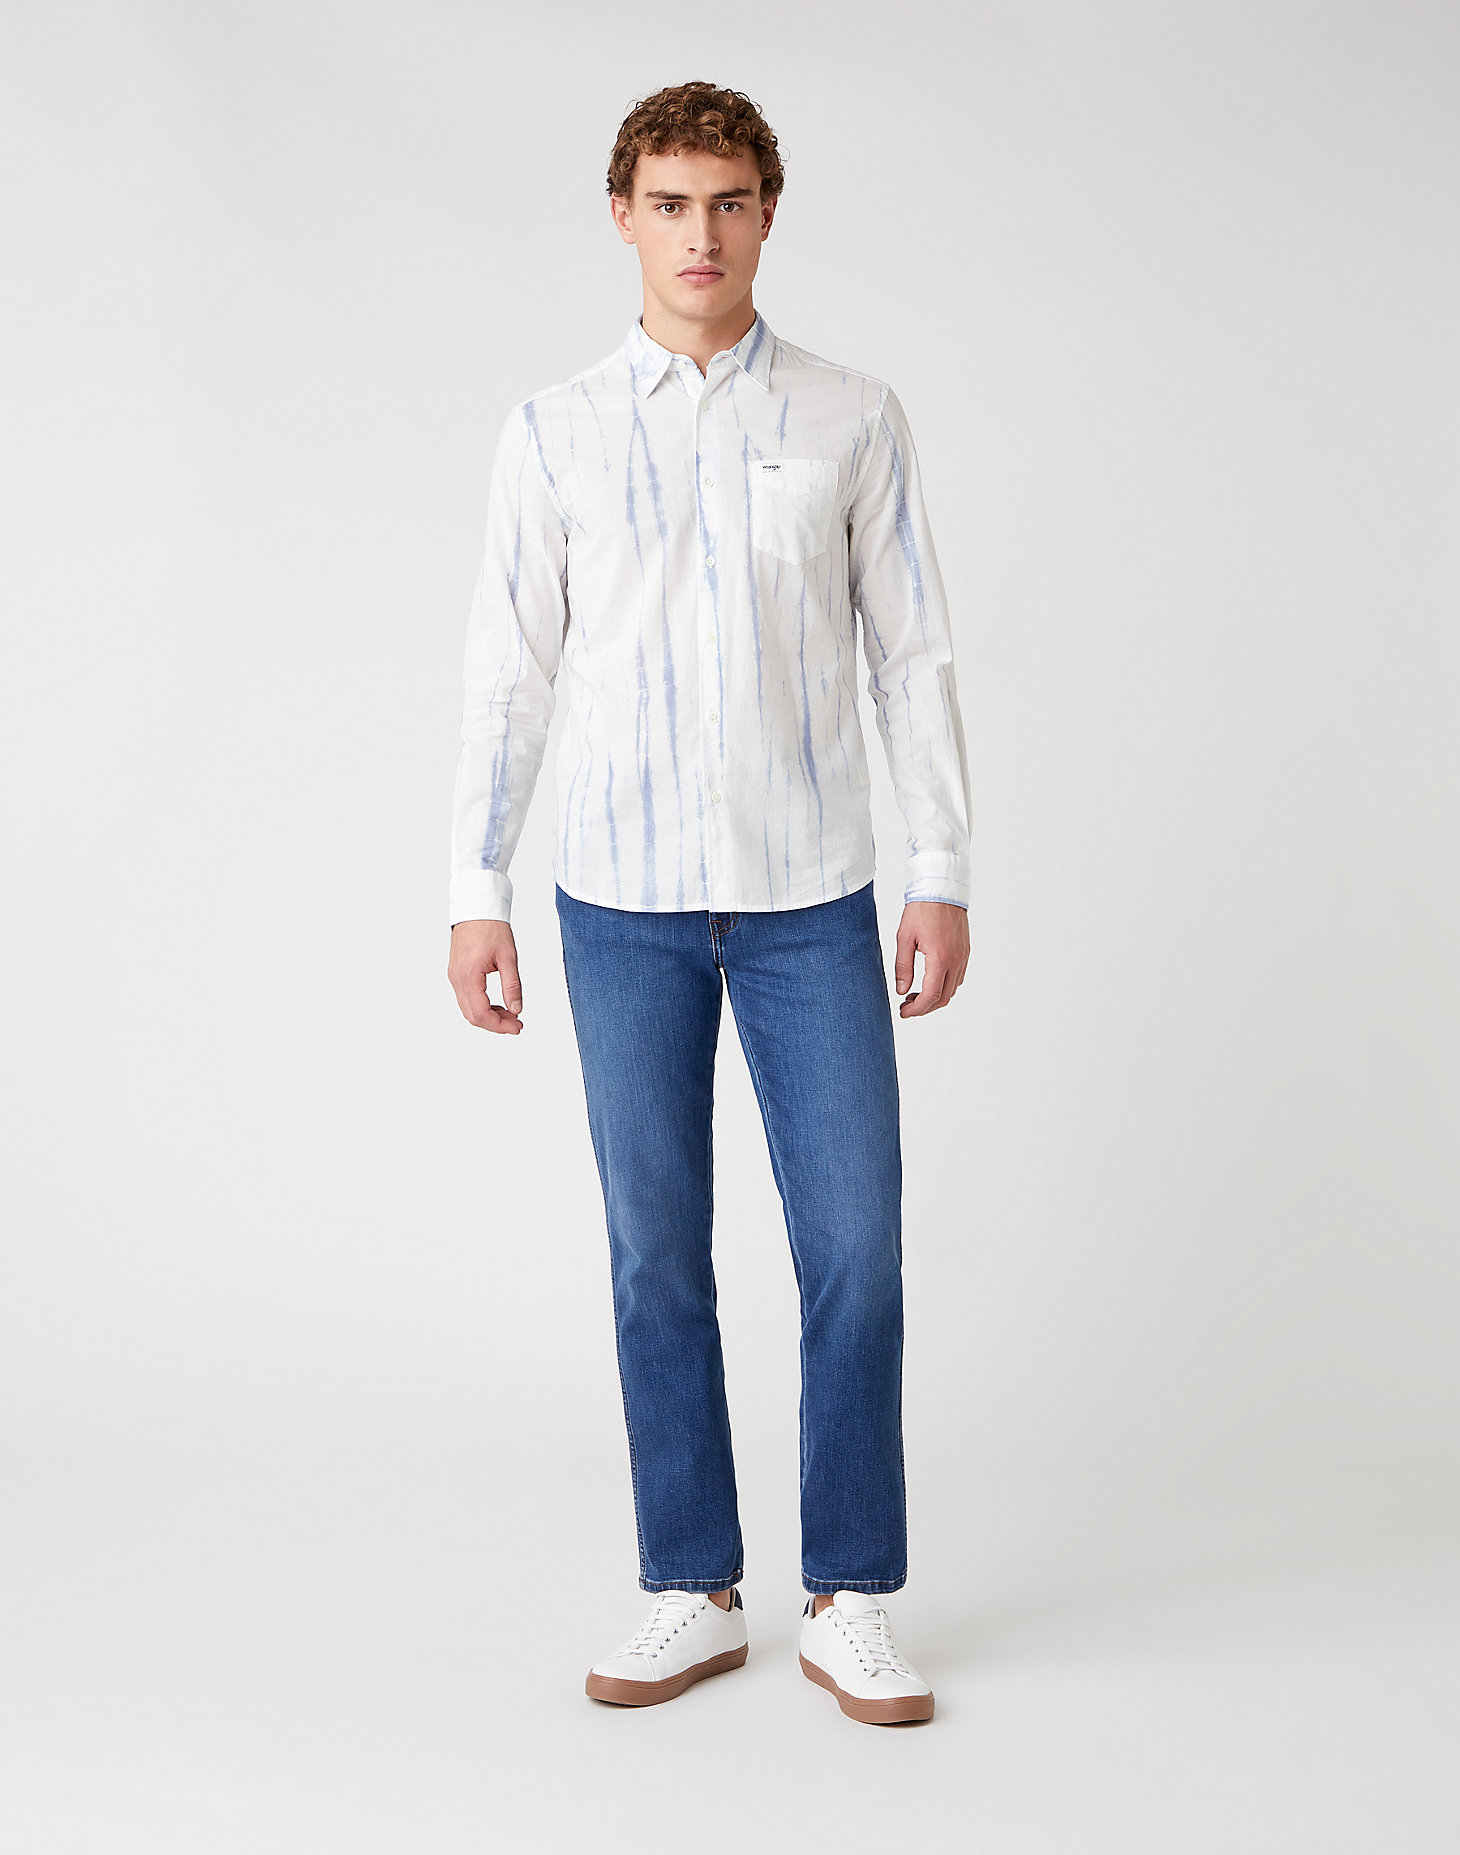 Long Sleeve One Pocket Shirt in White alternative view 1